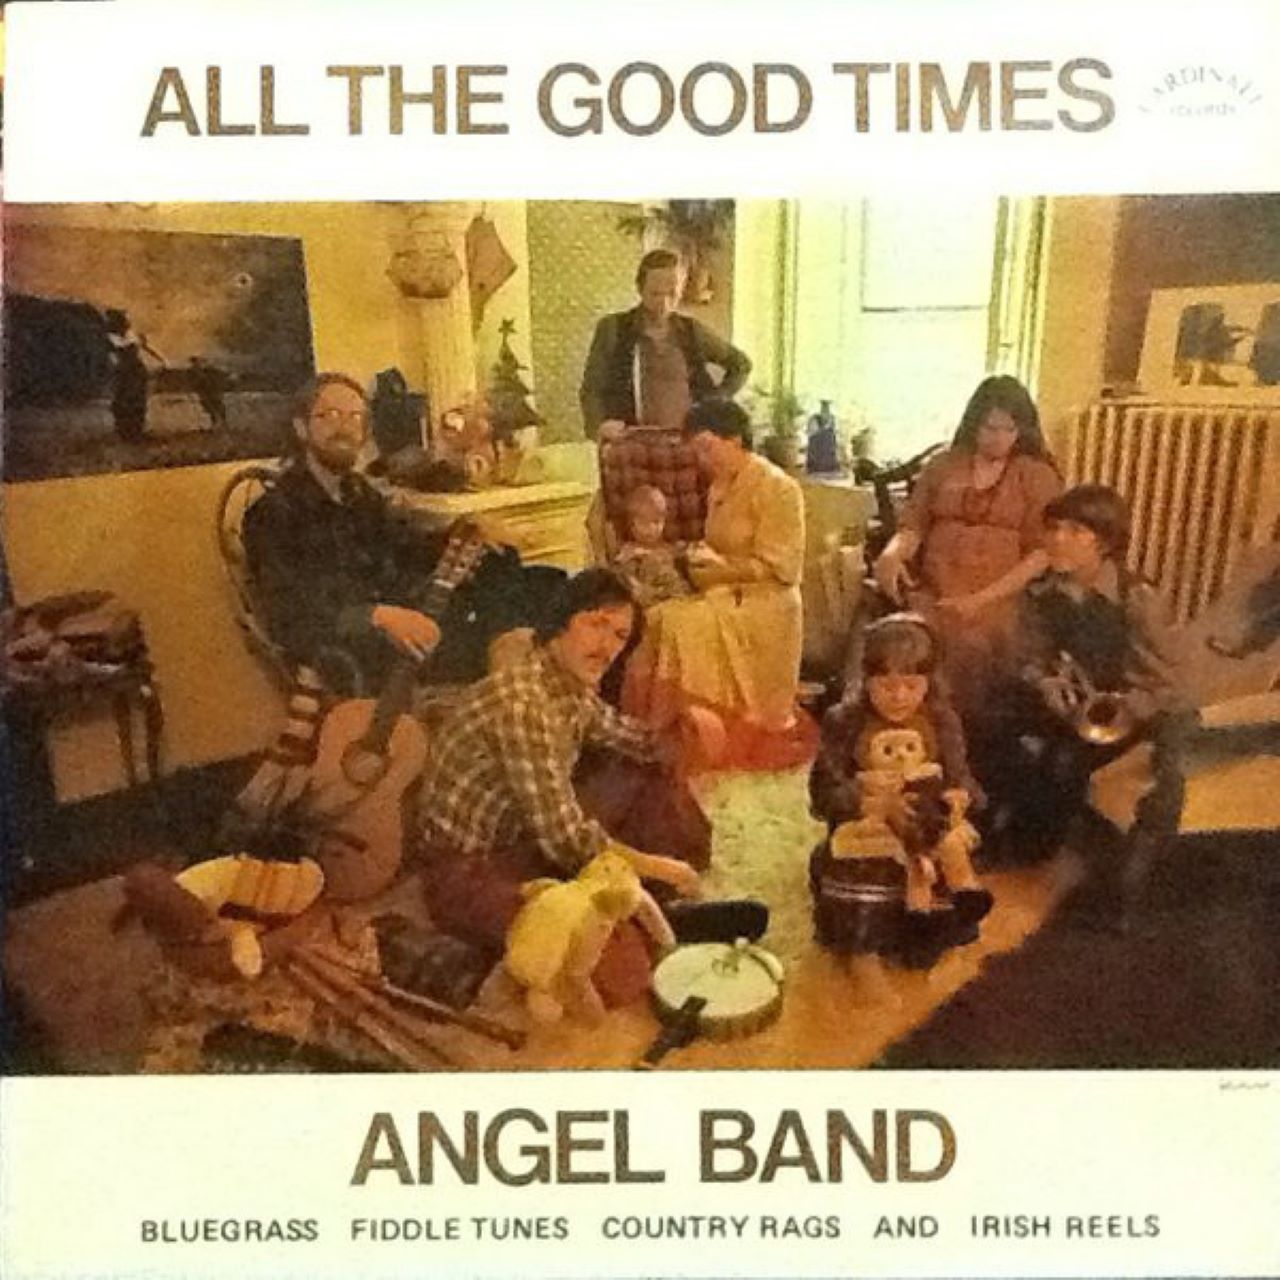 Angel Band - All The Good Times cover album